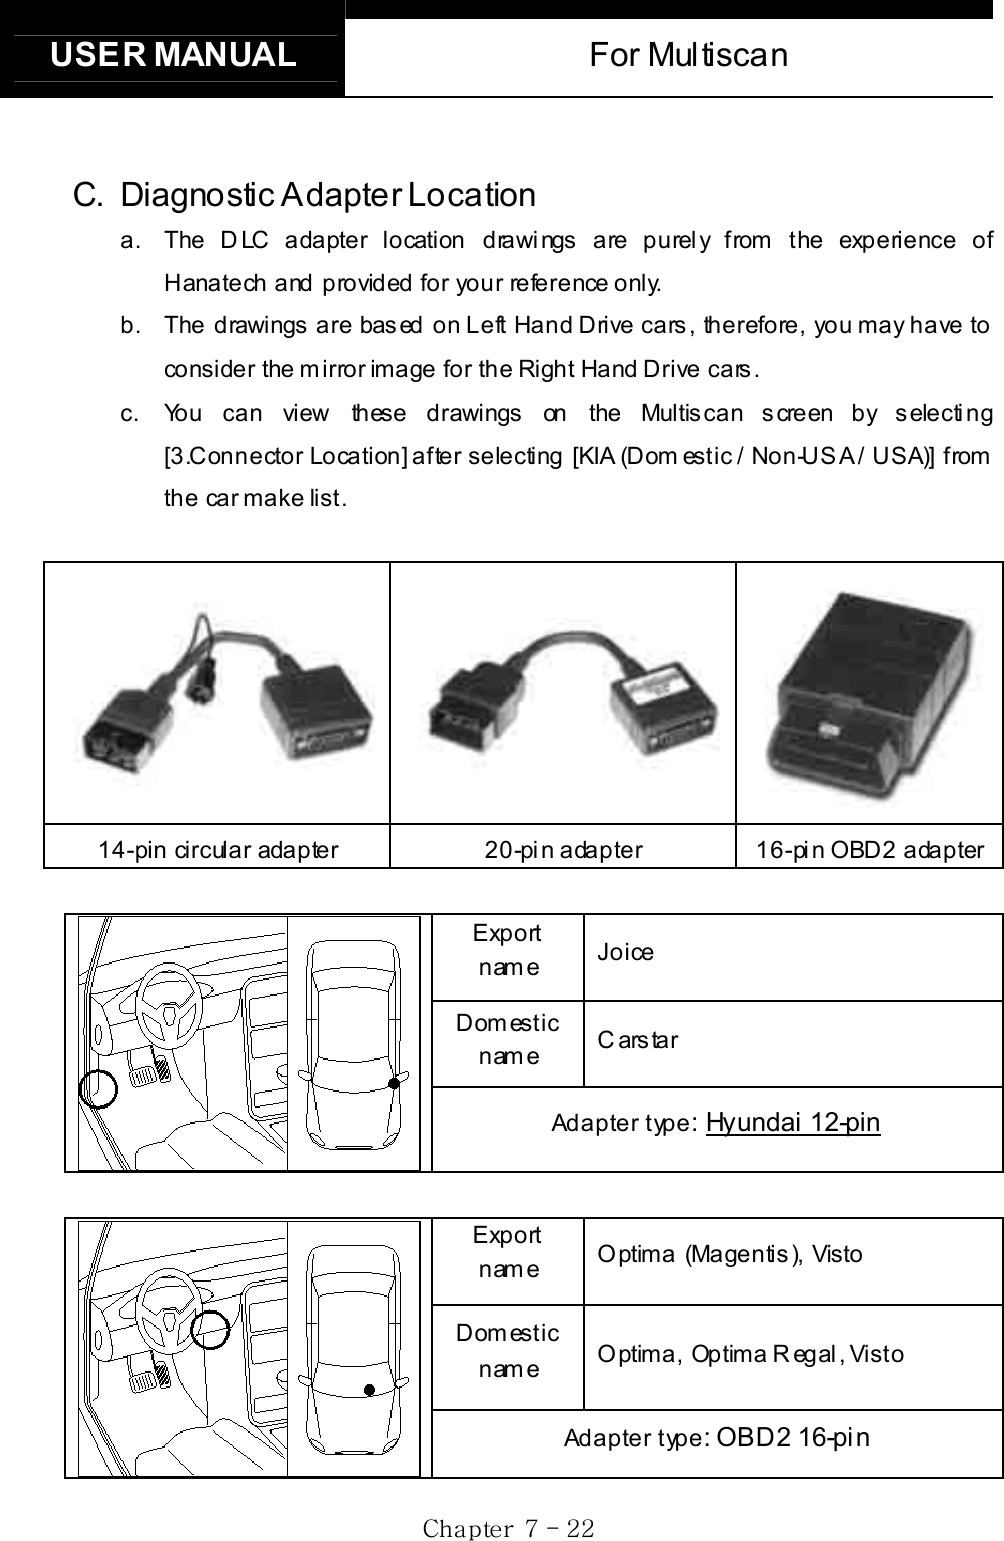 USER MANUAL  For Multiscan Gj  G^G TGYYGC. Diagnostic Adapter Location a.  The DLC adapter location drawings are purely from the experience of Hanatech and provided for your reference only. b.  The drawings are based on Left Hand Drive cars, therefore, you may have to consider the mirror image for the Right Hand Drive cars.     c.  You can view these drawings on the Multiscan screen by selecting [3.Connector Location] after selecting [KIA (Dom estic / Non-USA / USA)] from the car make list. 14-pin circular adapter  20-pin adapter  16-pin OBD2 adapter Export  name  Joice Domestic name  C ars tar Adapter type: Hyundai 12-pinExport  name  Optima (Magentis), Visto Domestic name  Optima, Optima R egal , Visto Adapter type: OBD2 16-pin